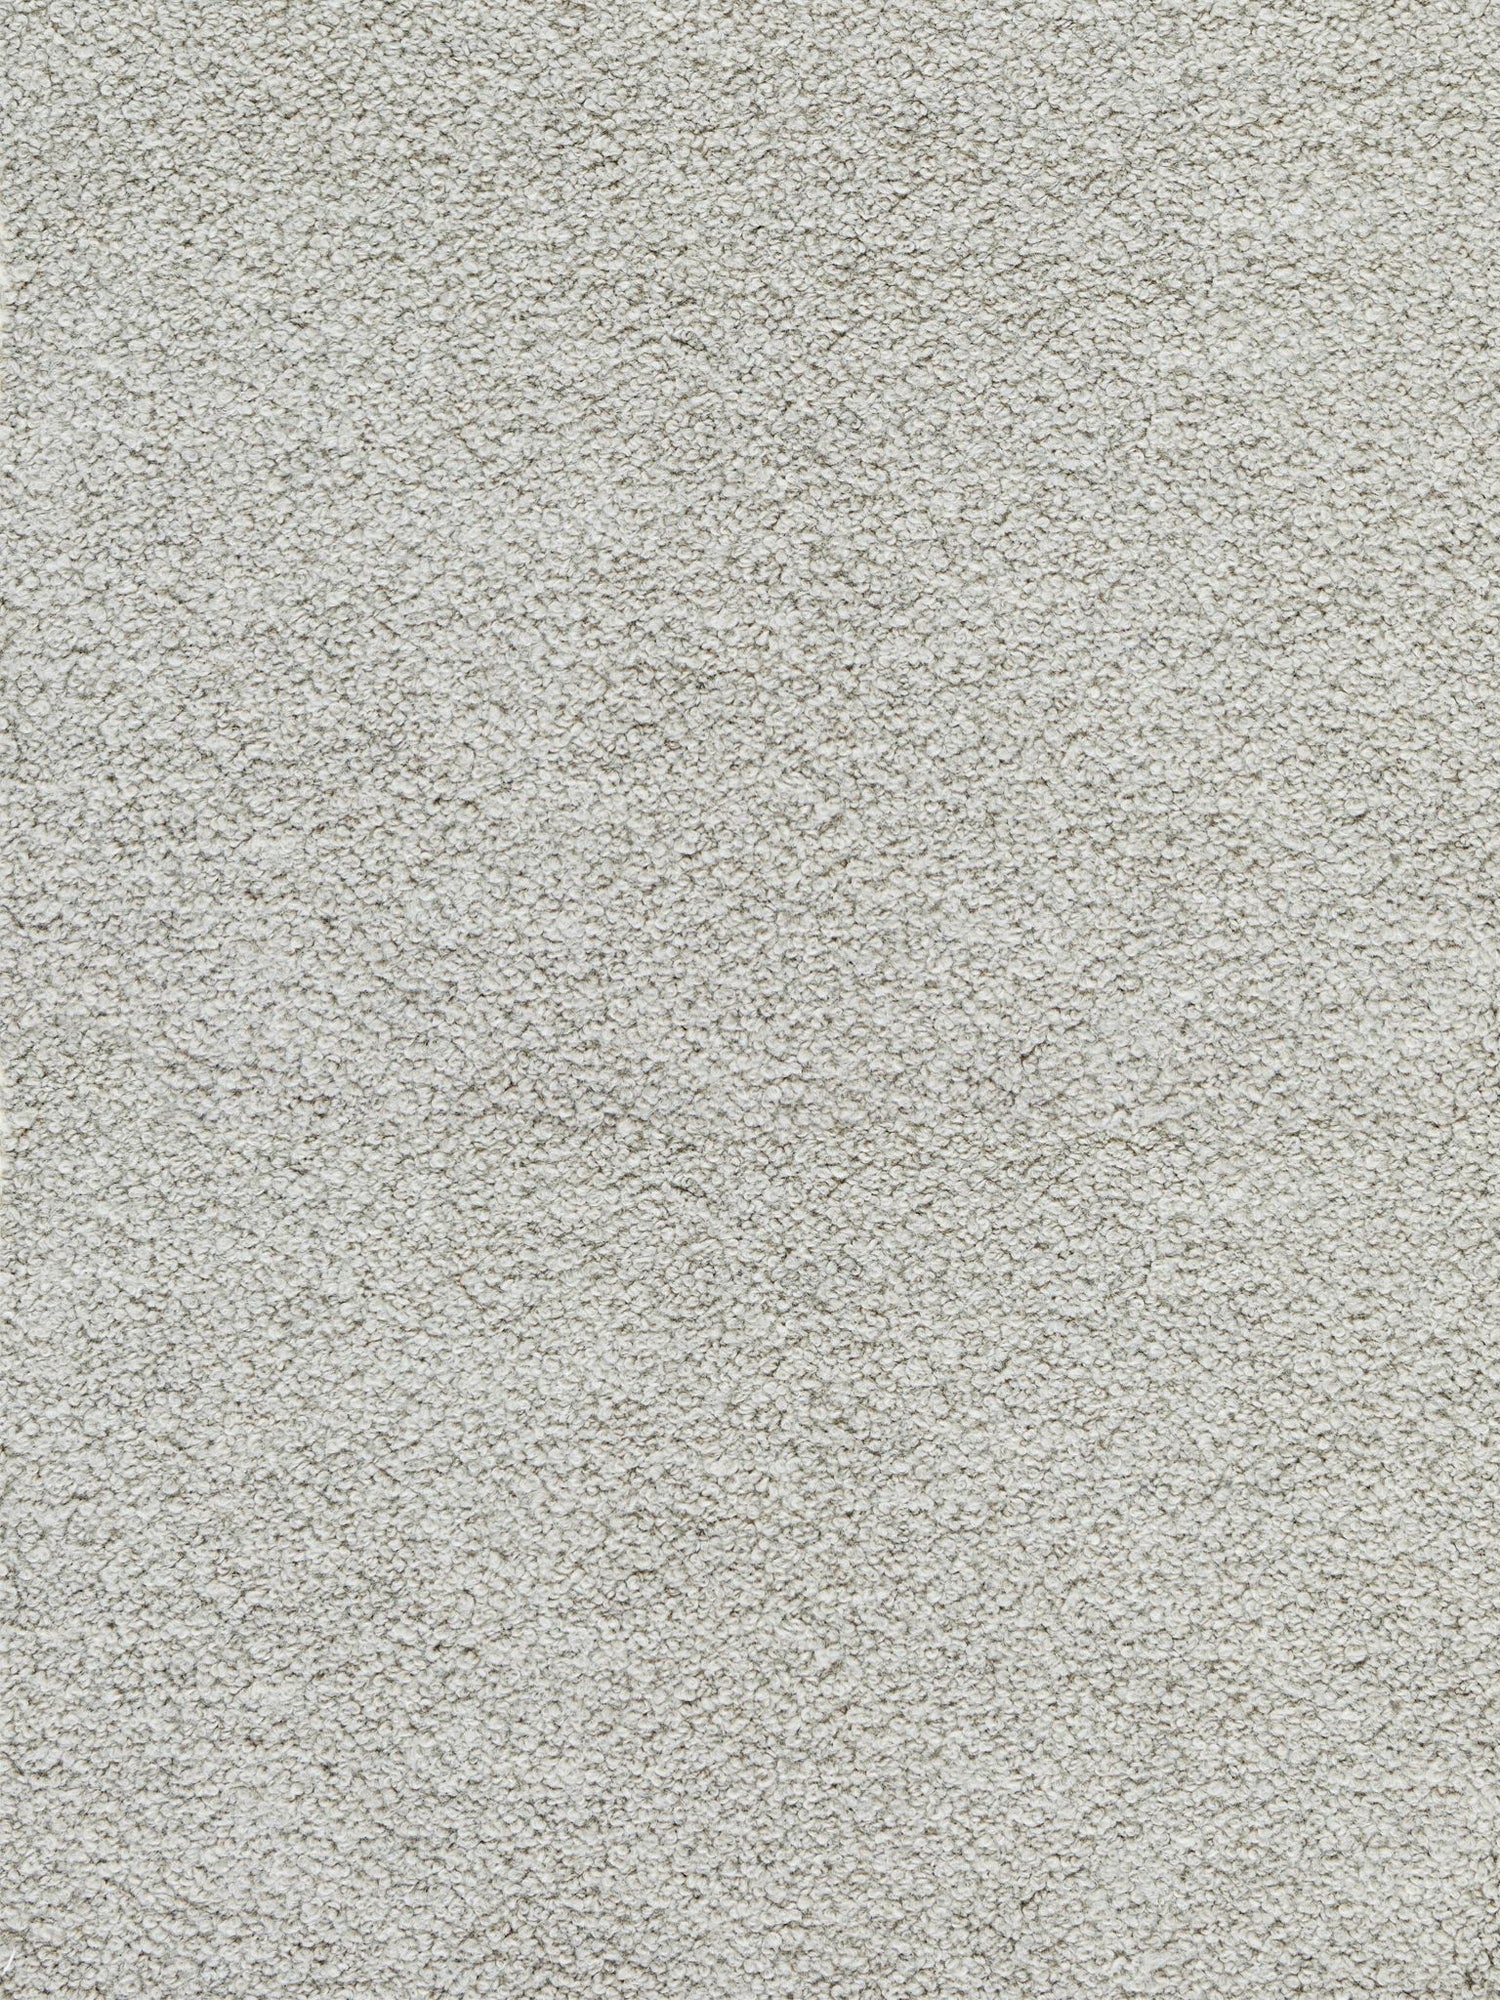 Mouton fabric in silver color - pattern number BZ 0002A501 - by Scalamandre in the Old World Weavers collection